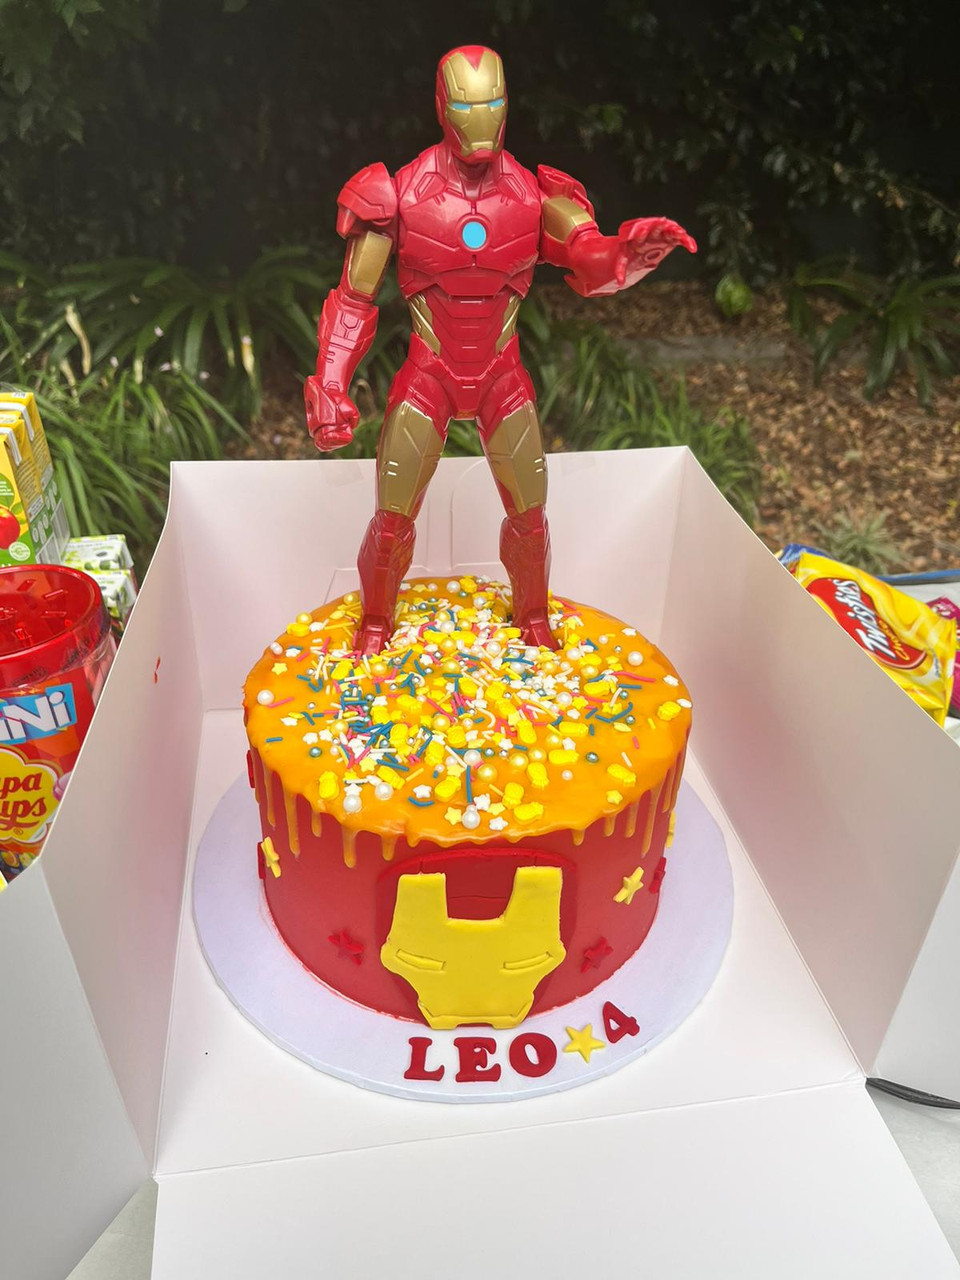 Iron Man Birthday Cake Ideas Images (Pictures)